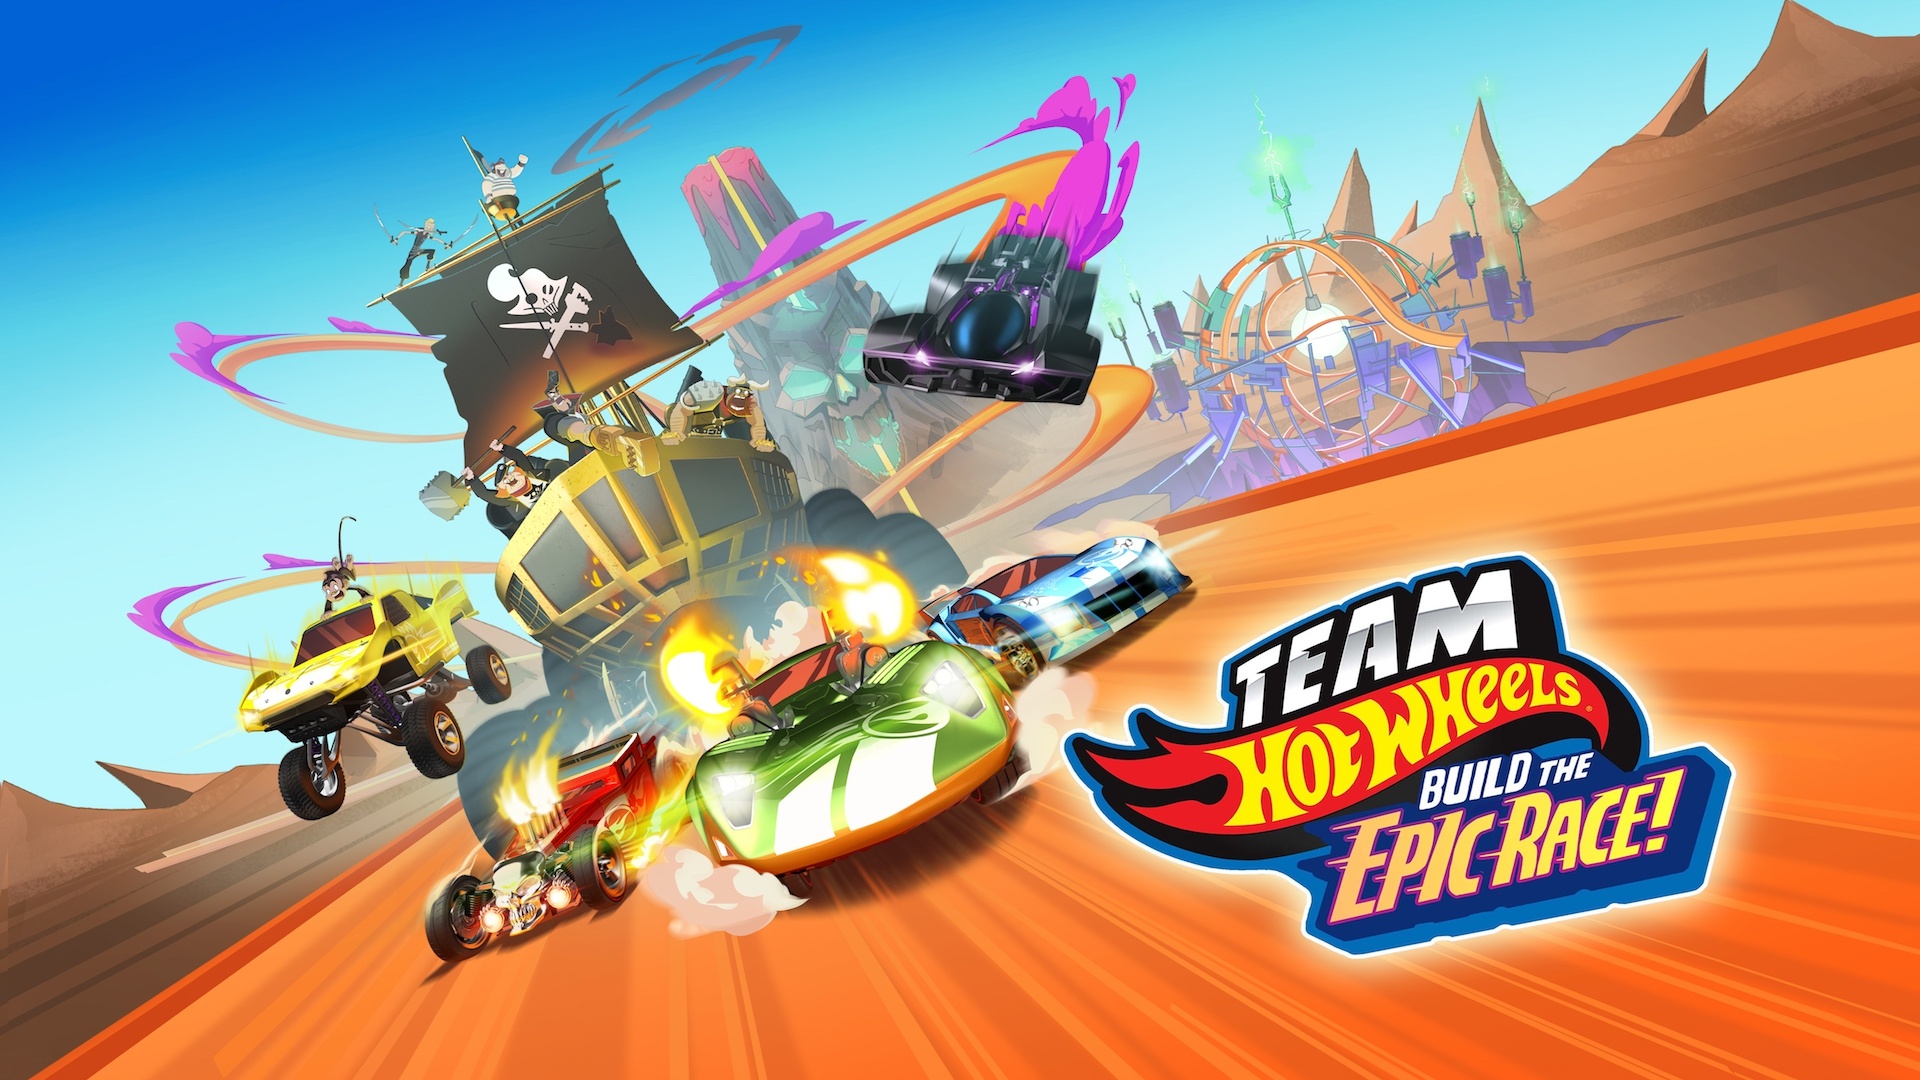 Hot Wheels cars, Epic race build, Thrilling competition, Action-packed entertainment, 1920x1080 Full HD Desktop